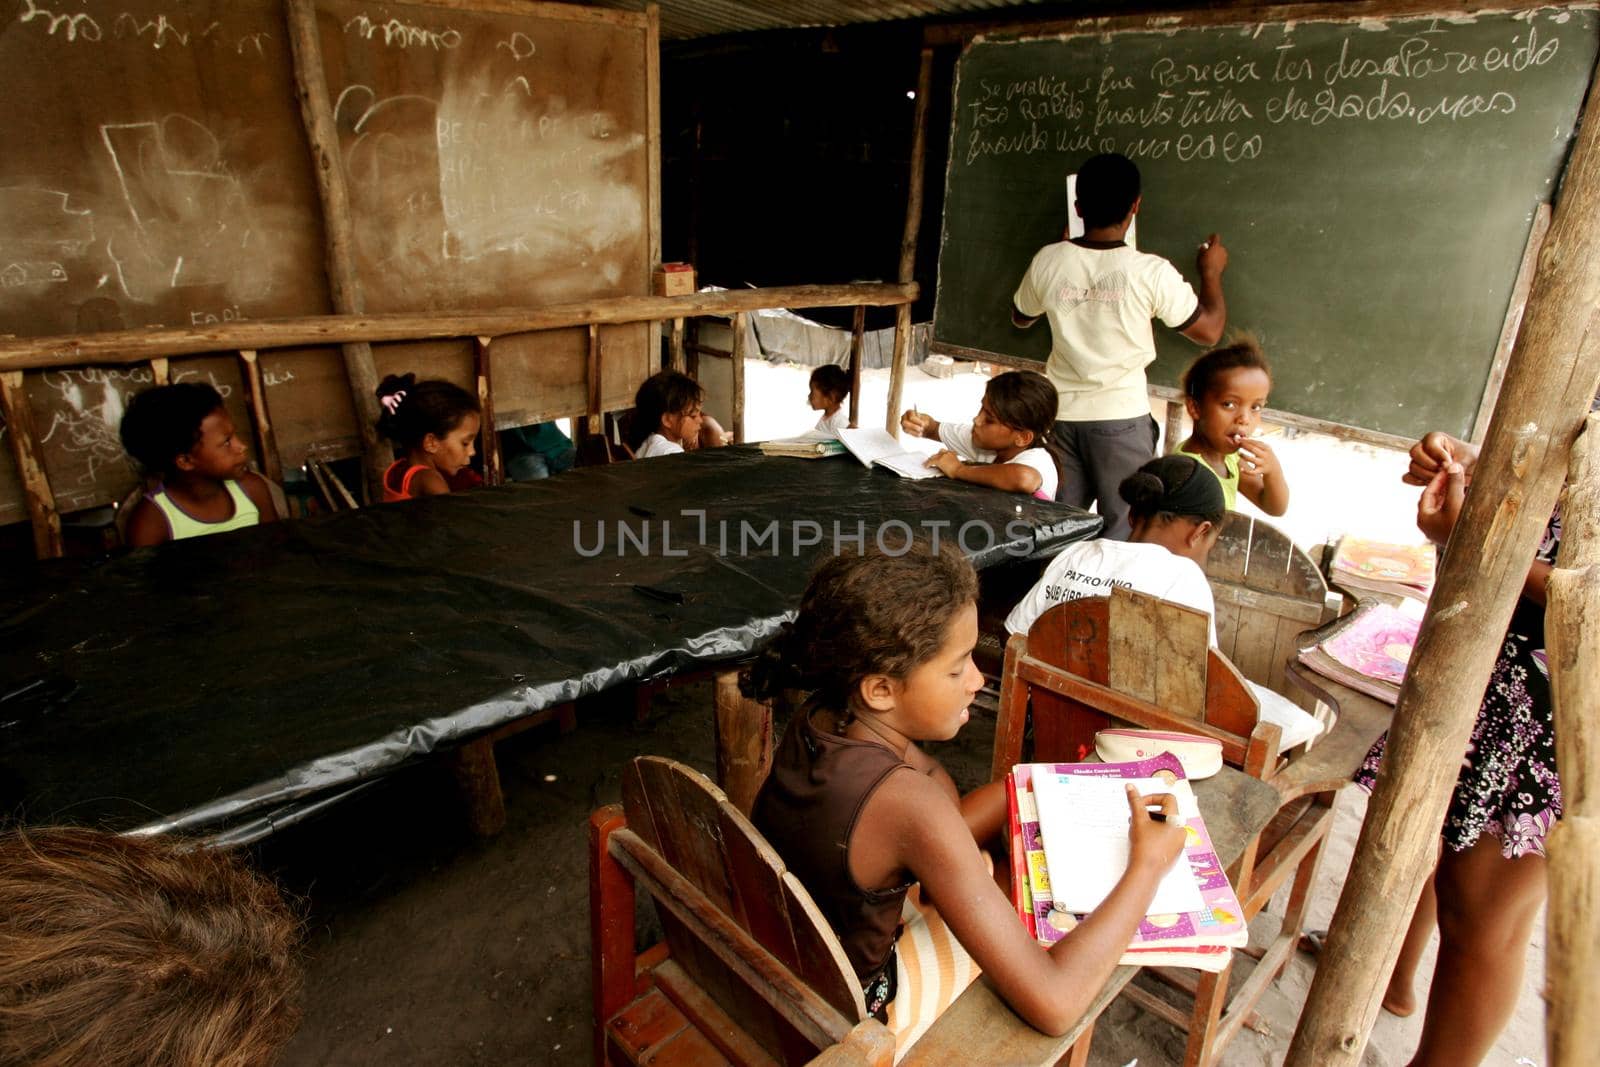 members of the Landless Movement (MST) are seen in a makeshift classroom at a social movement camp along the BR 101 highway in the city of Eunapolis.
